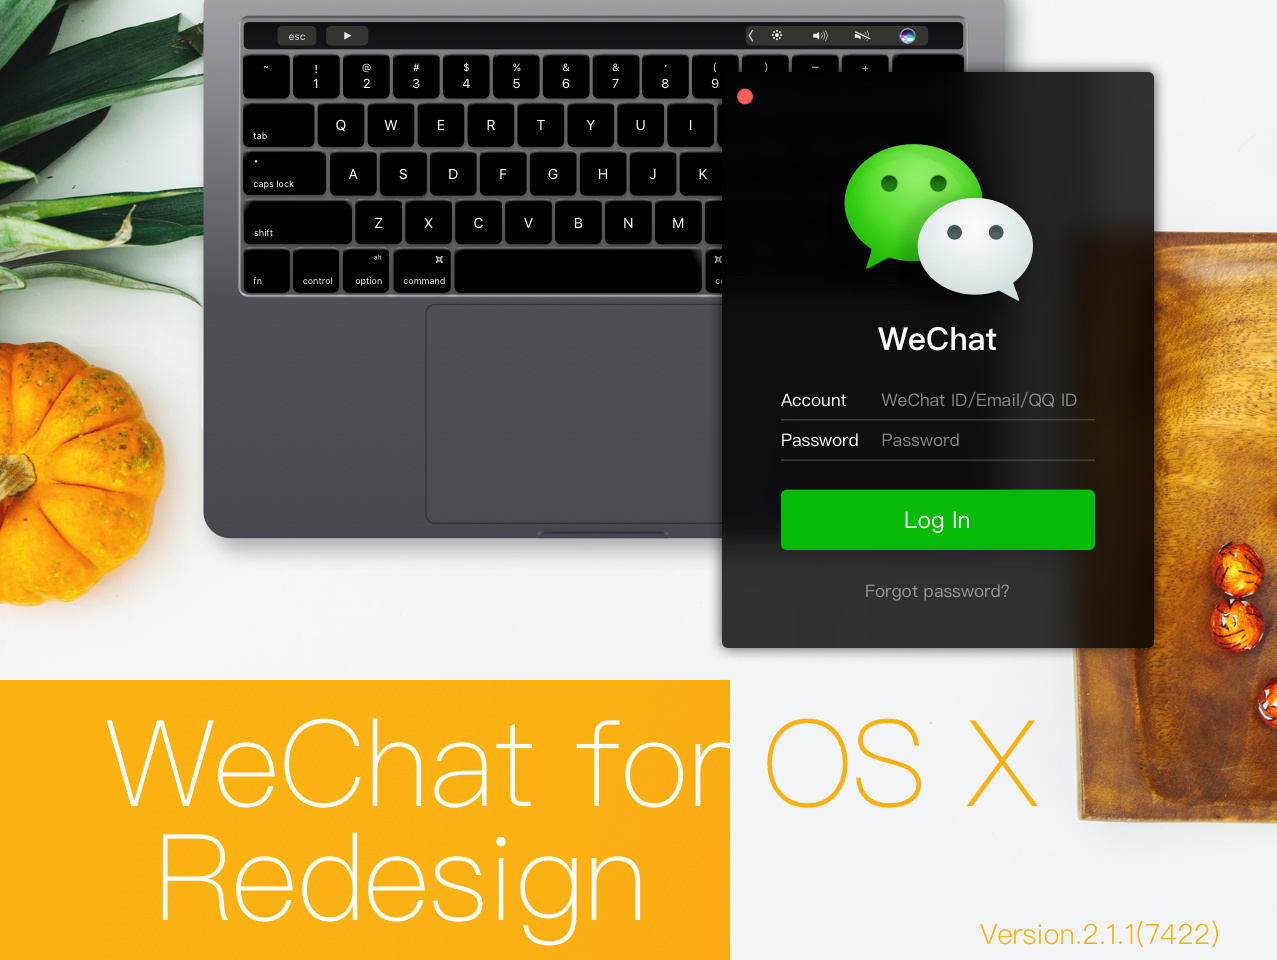 wechat for mac os x 10.6.8